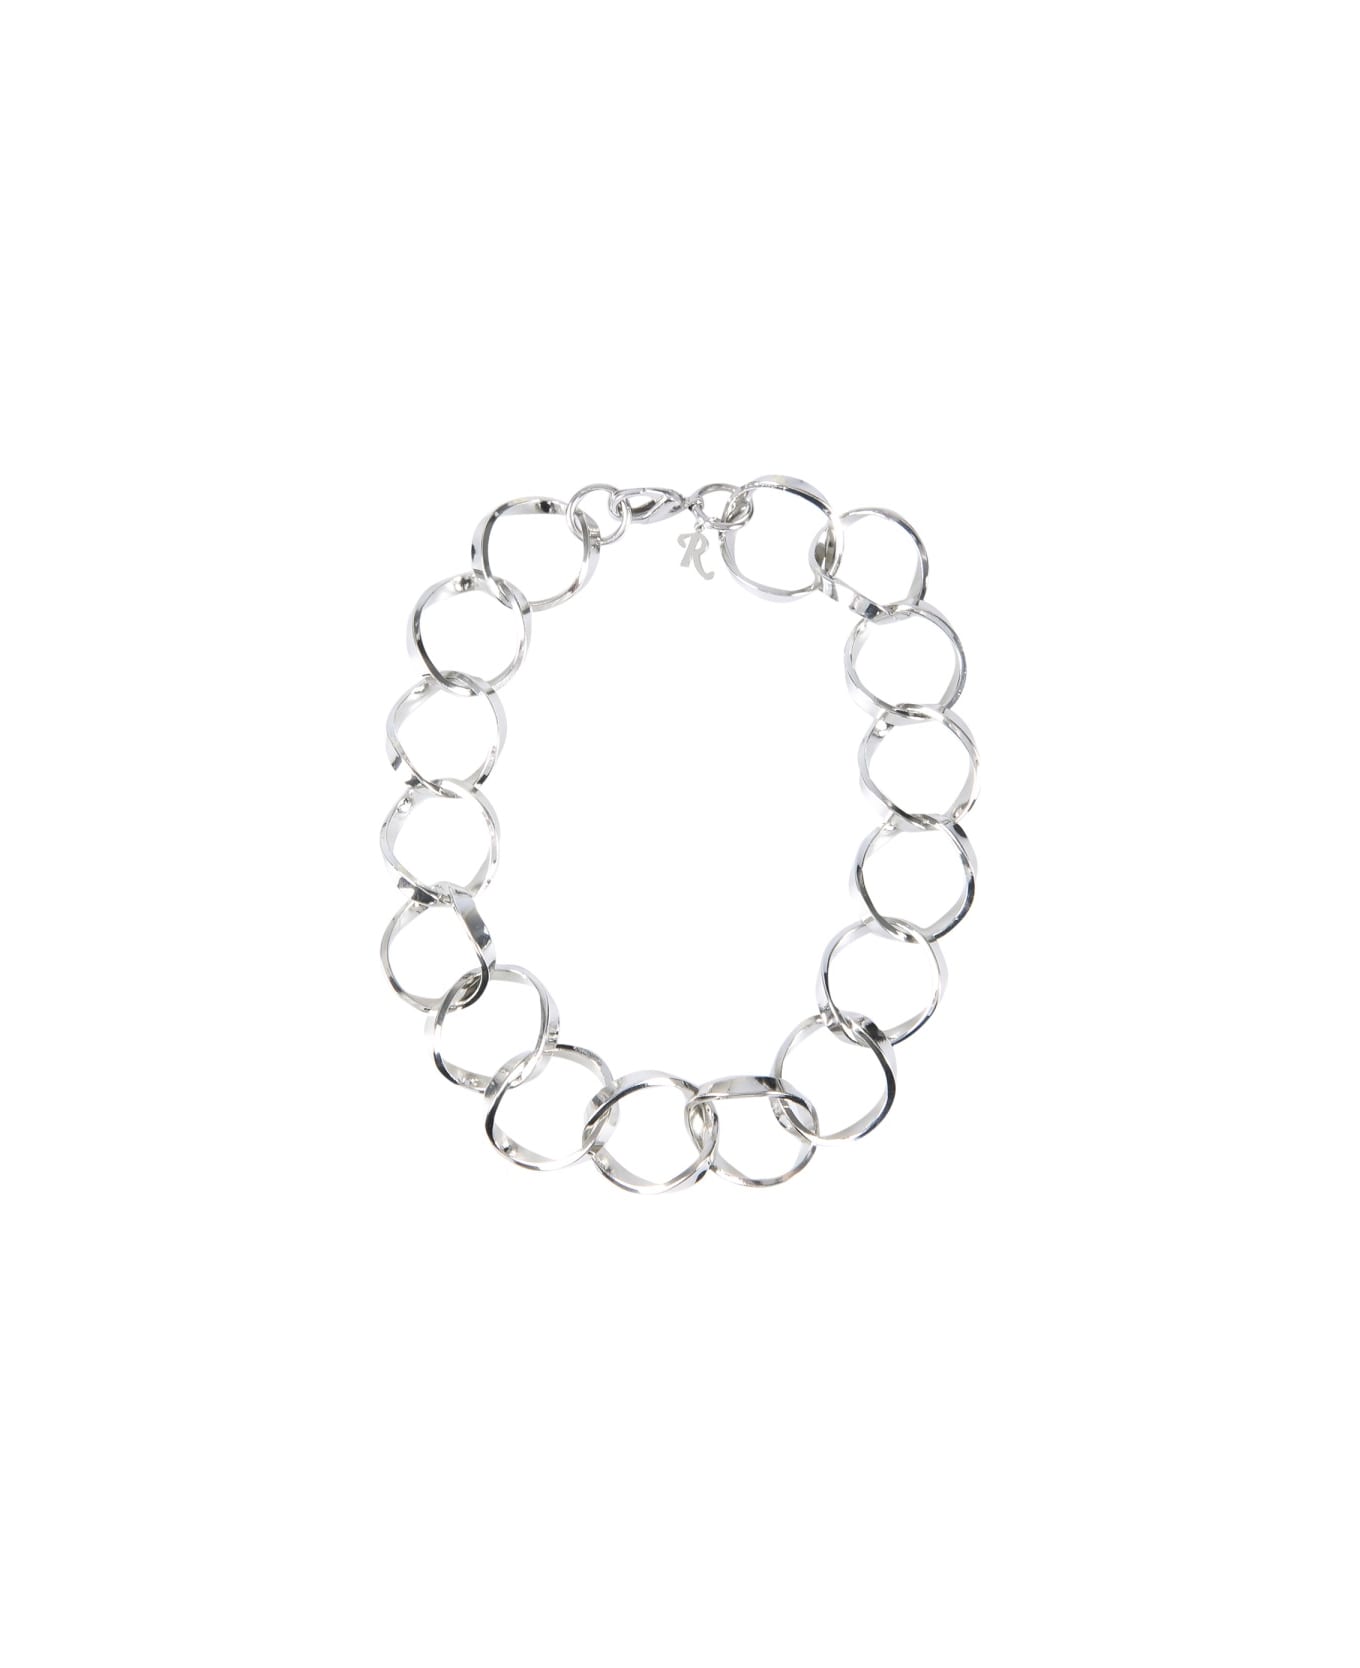 Raf Simons Linked Rings Necklace - SILVER ネックレス